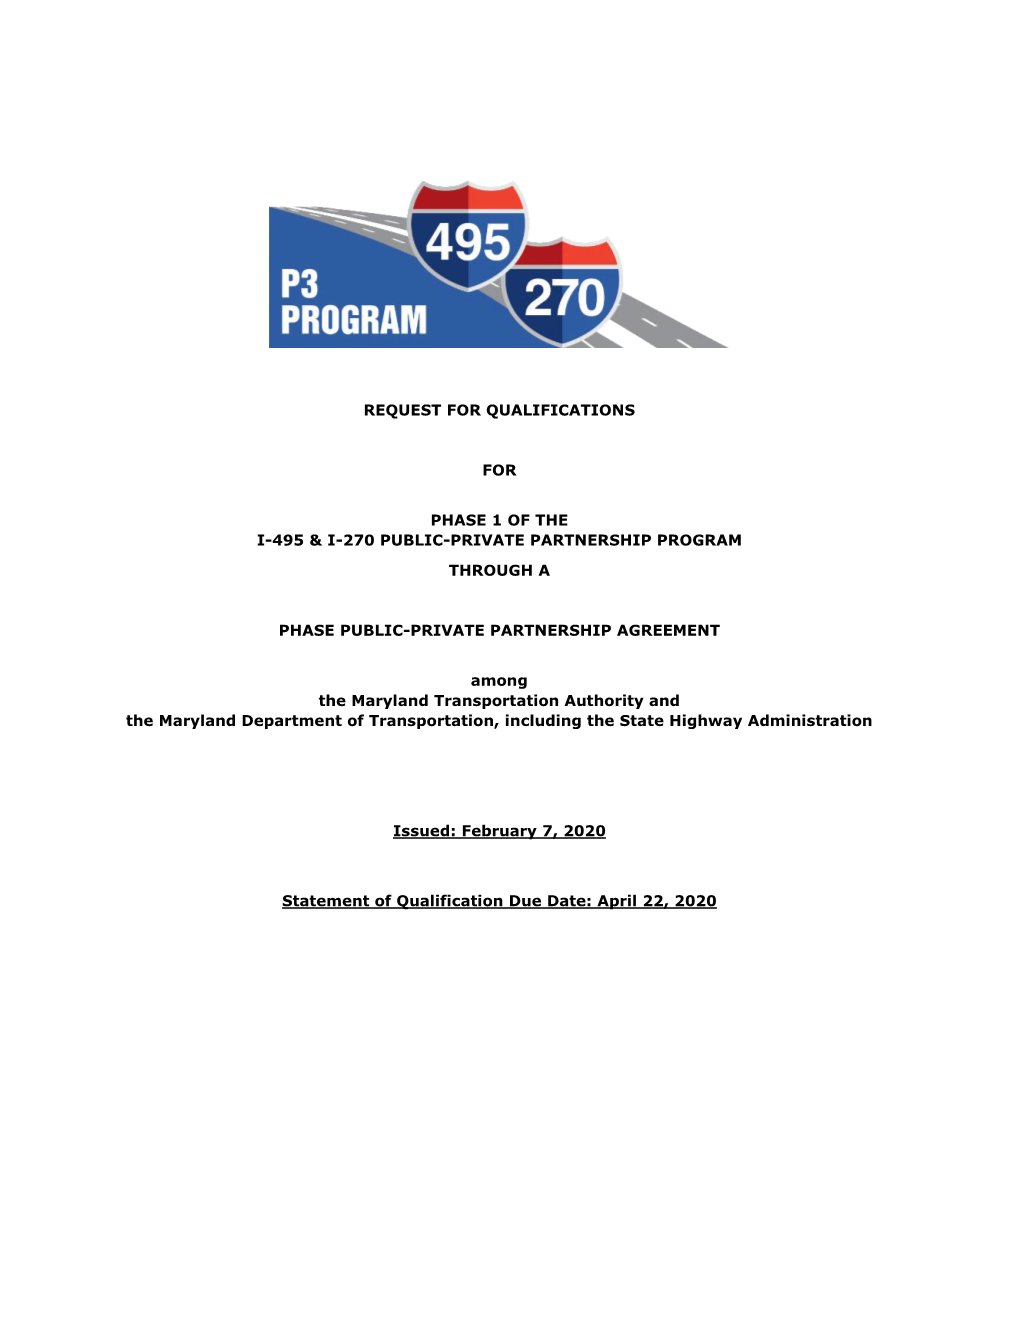 Request for Qualifications for Phase 1 of the I-495 & I